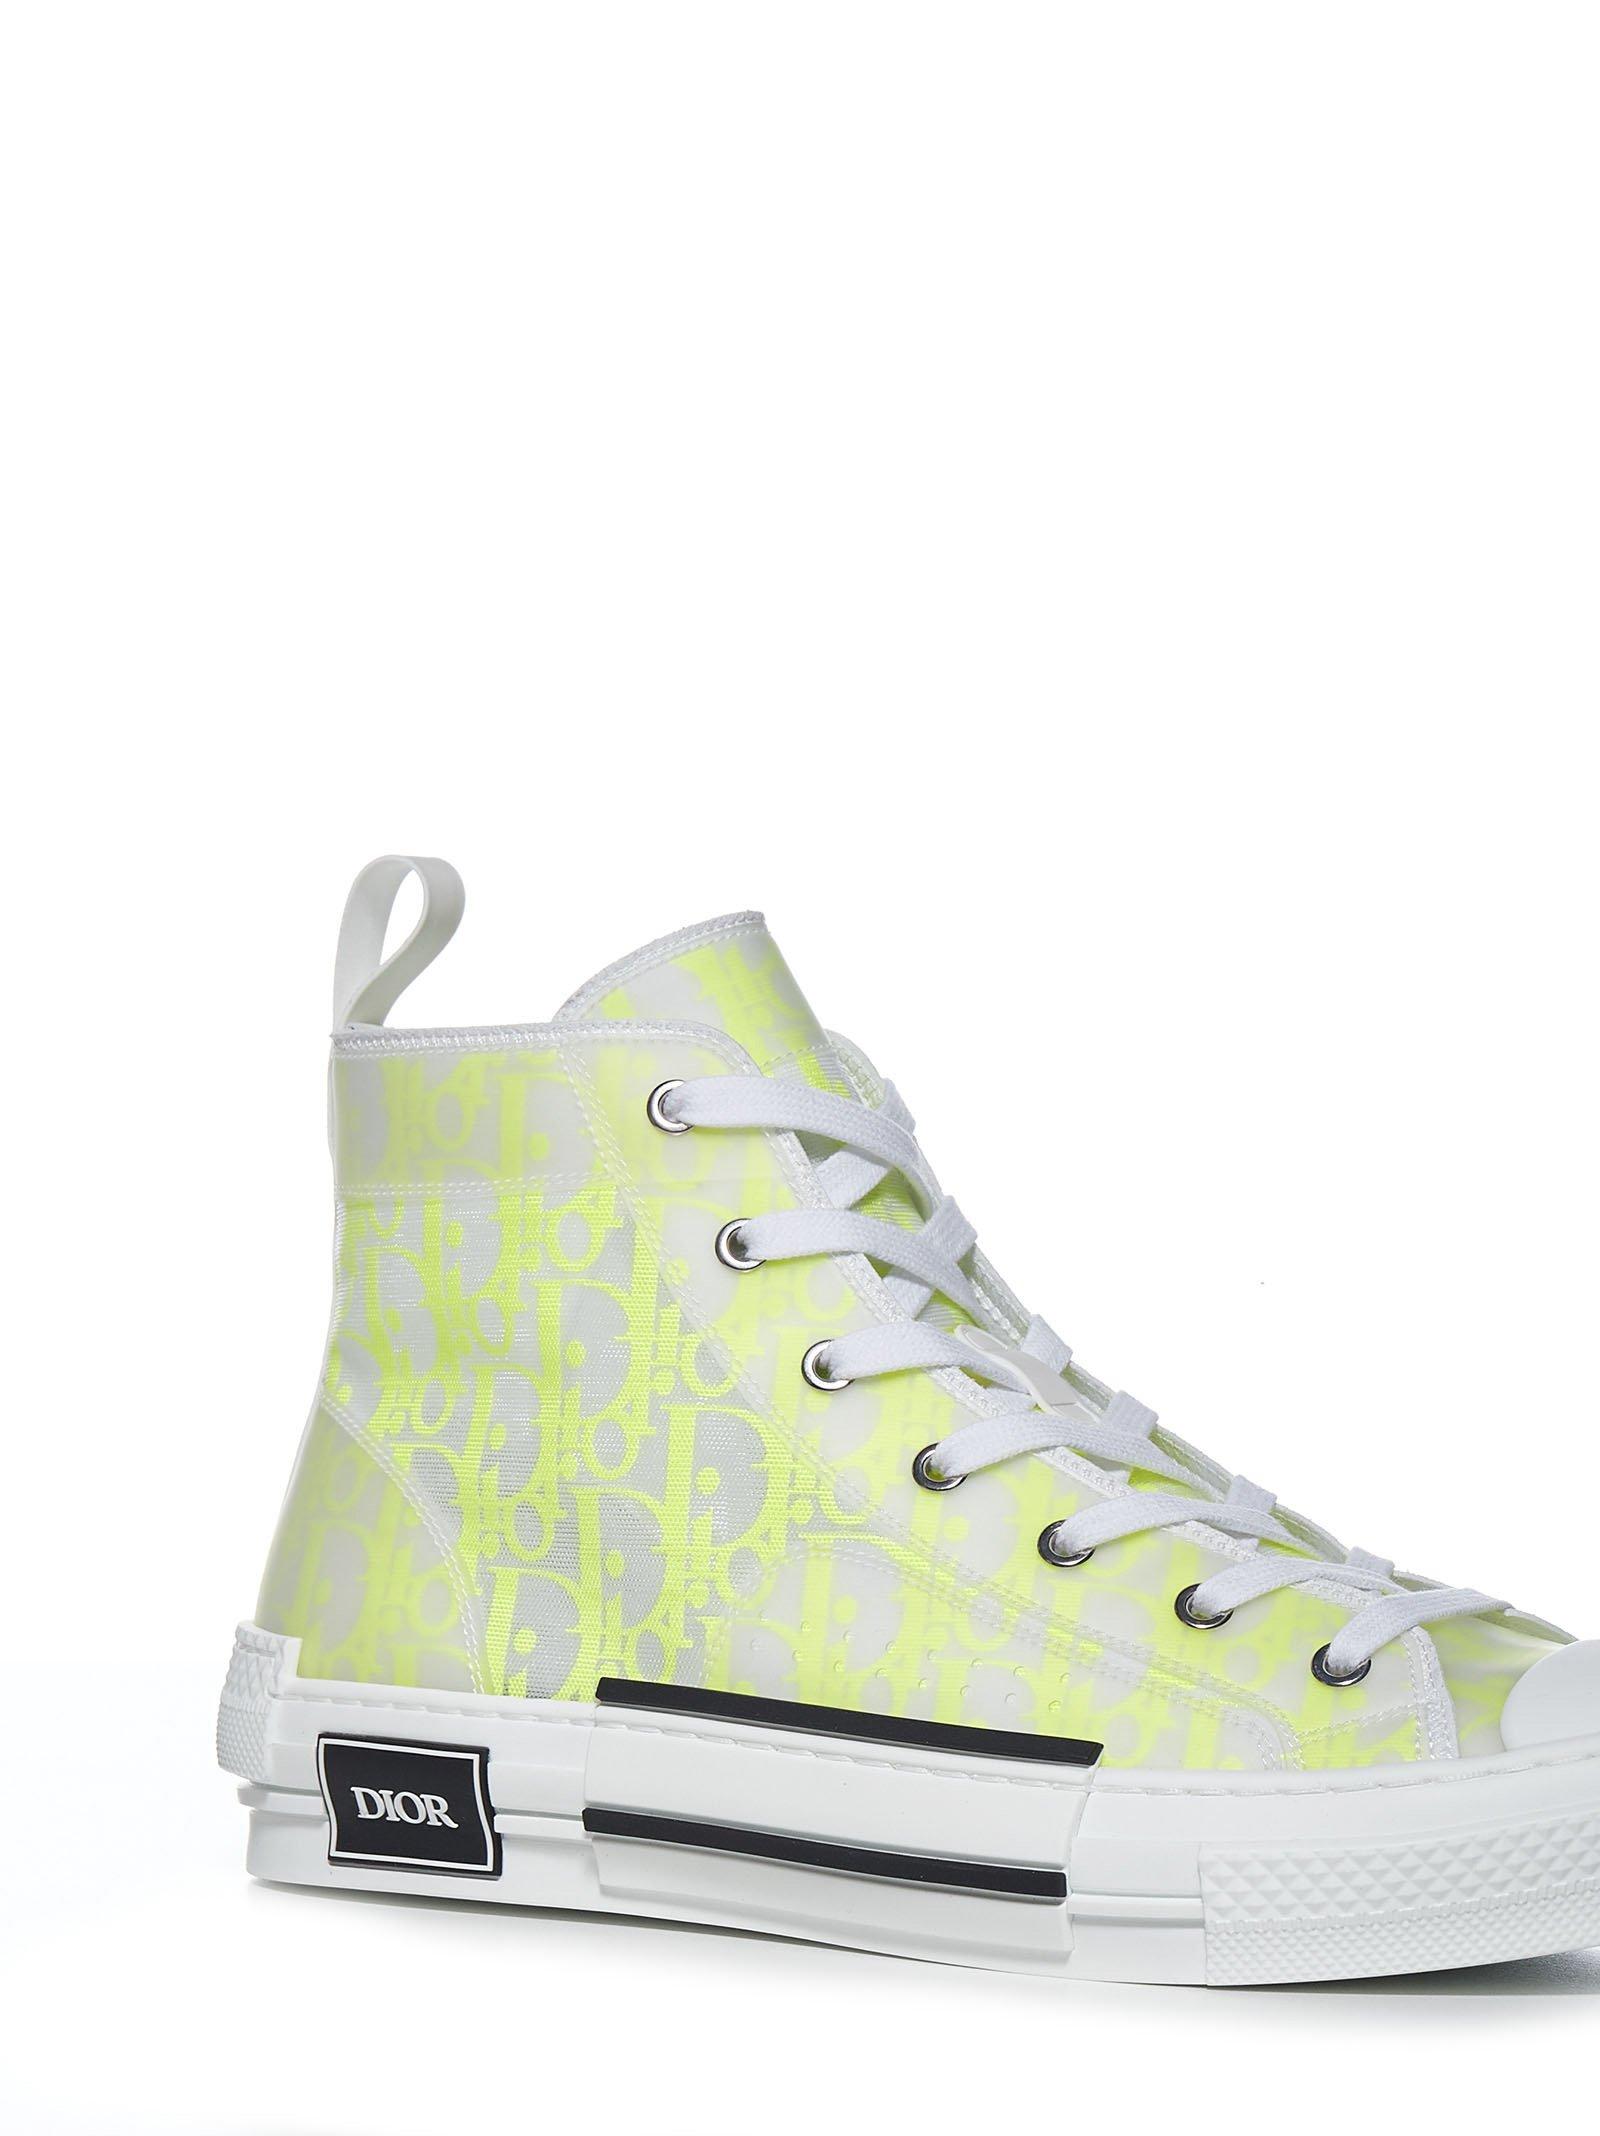 Dior B23 High Top Sneakers in Yellow for Men | Lyst